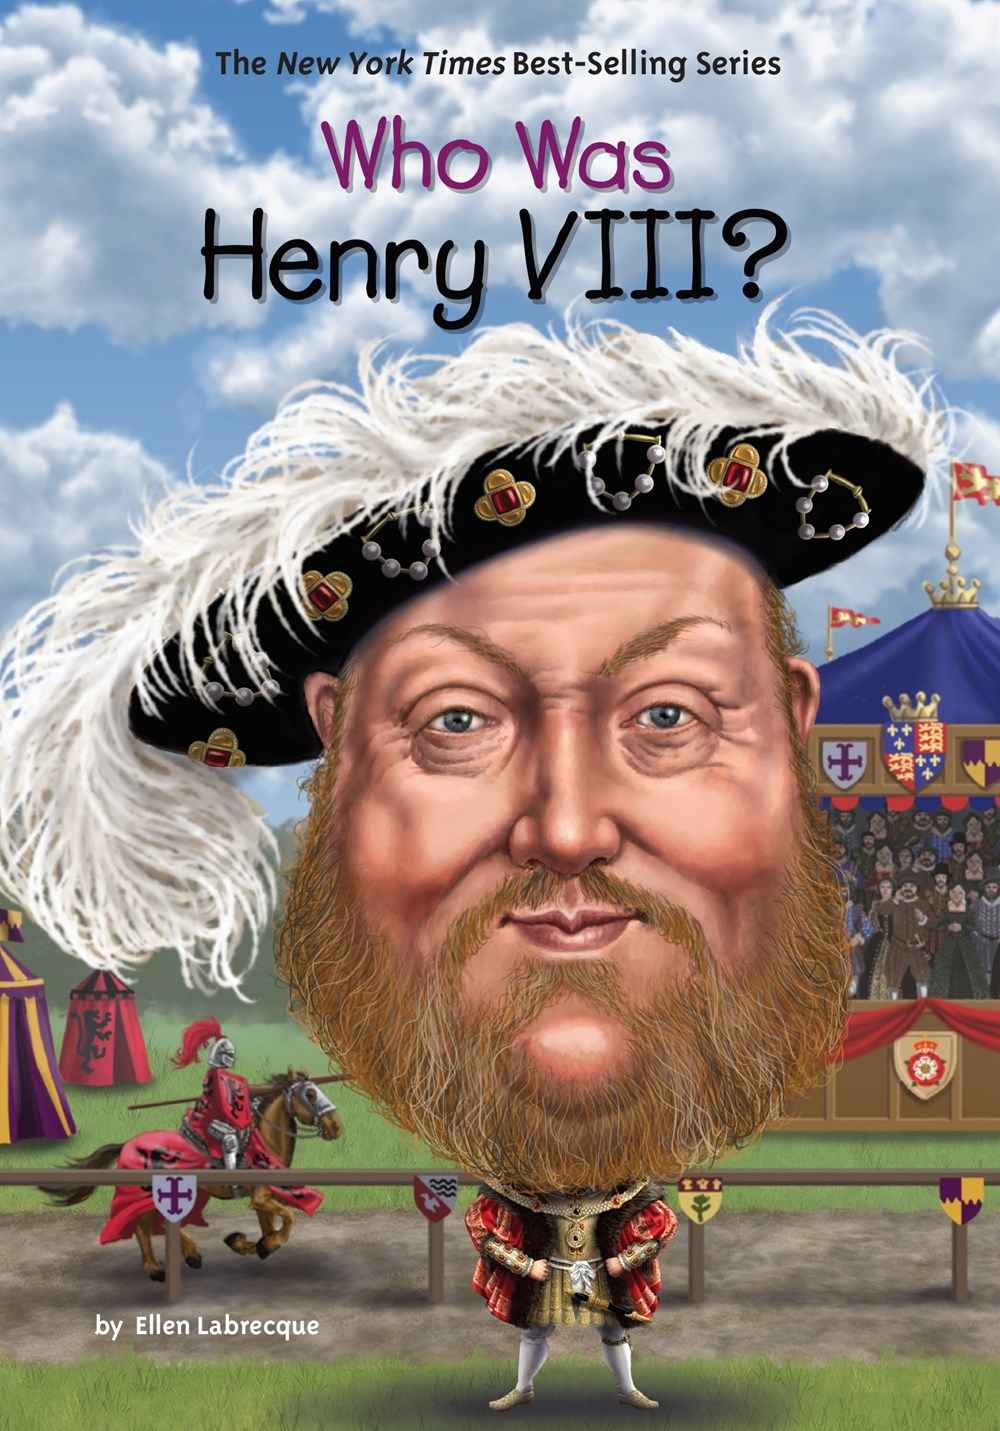 Who was Henry VIII